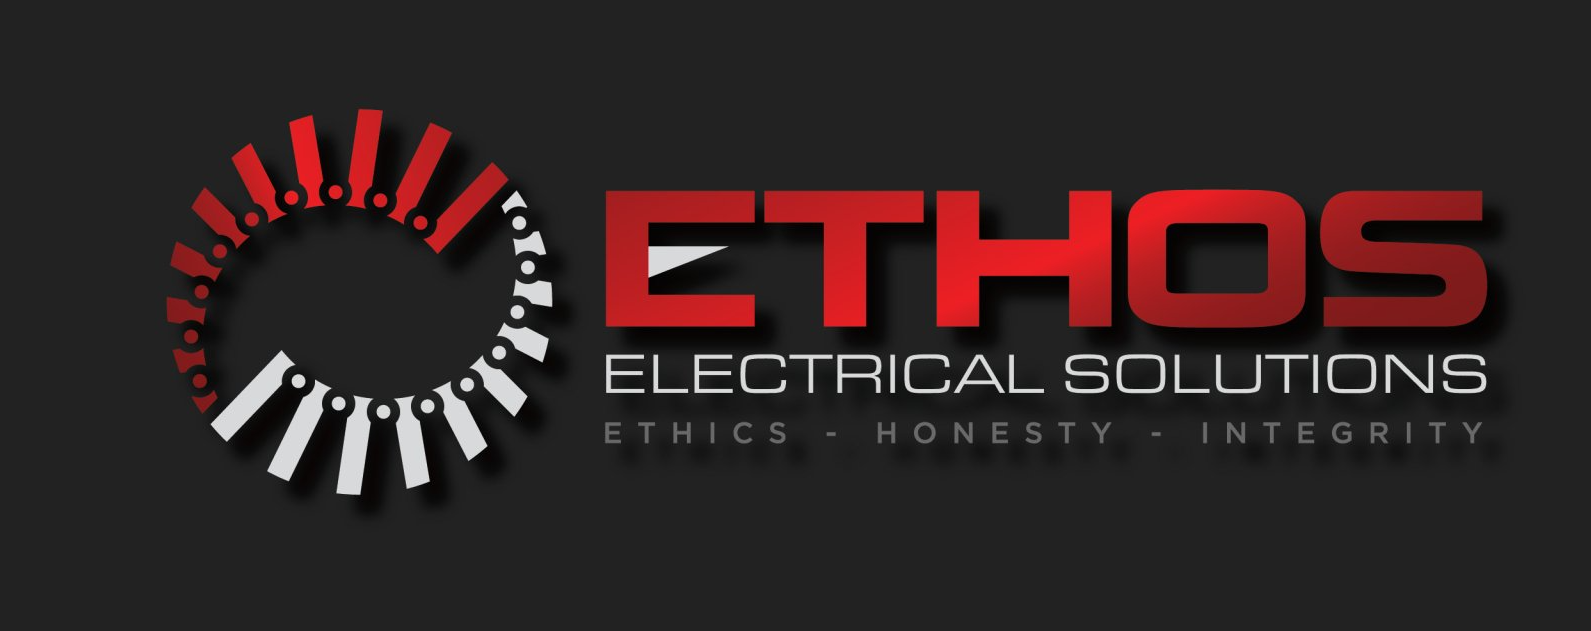 Ethos Electrical Solutions Logo